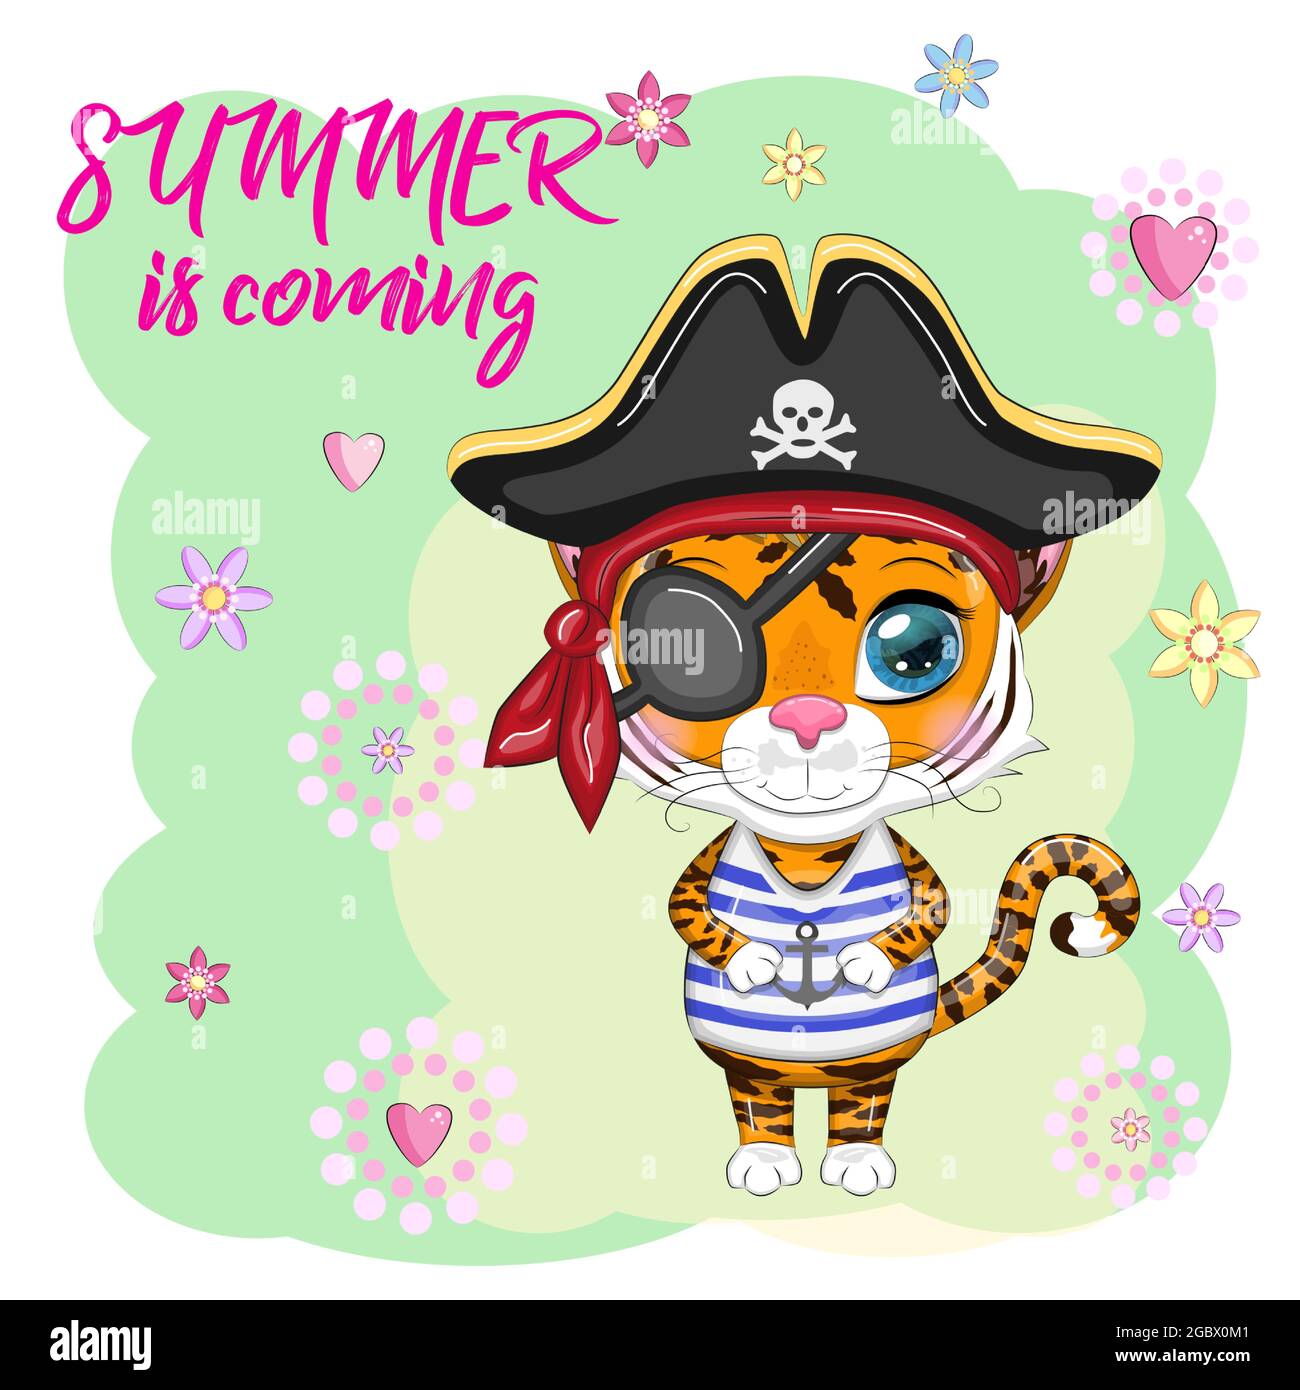 Cartoon tiger pirate in a striped T-shirt, cocked hat, with an eye patch. Hawaii, Vacation, Sea. Summer is coming. Children's style, sweetheart. Symbo Stock Vector